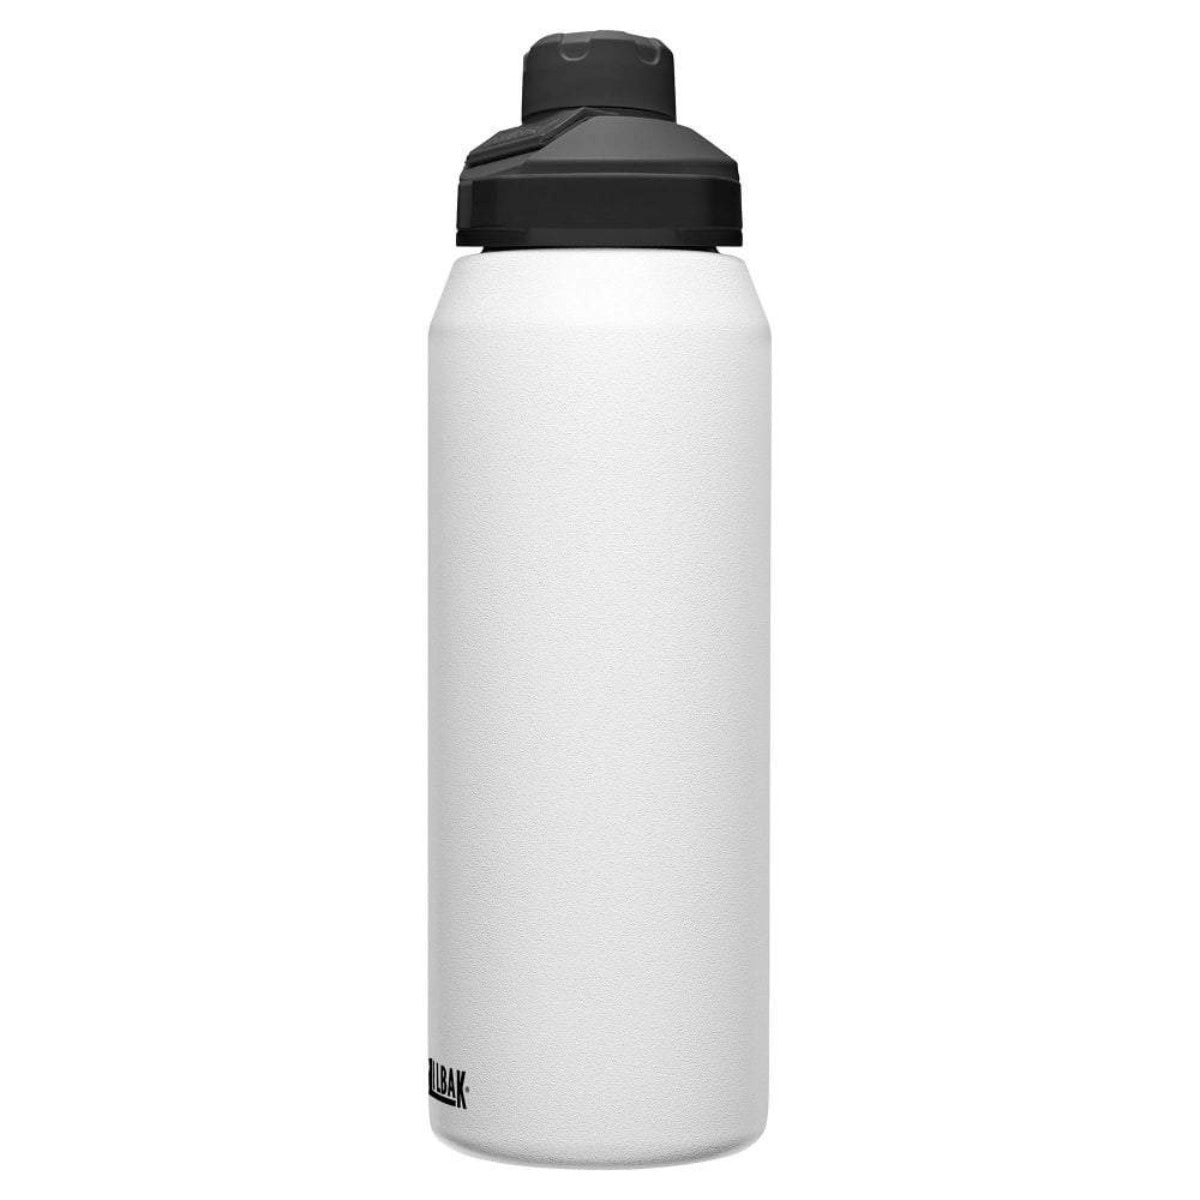 Stainless steel vacuum insulated thermos/bottle by technological wizards Camelbak, featuring leak-proof design, magnetic cap and easy carry handle.